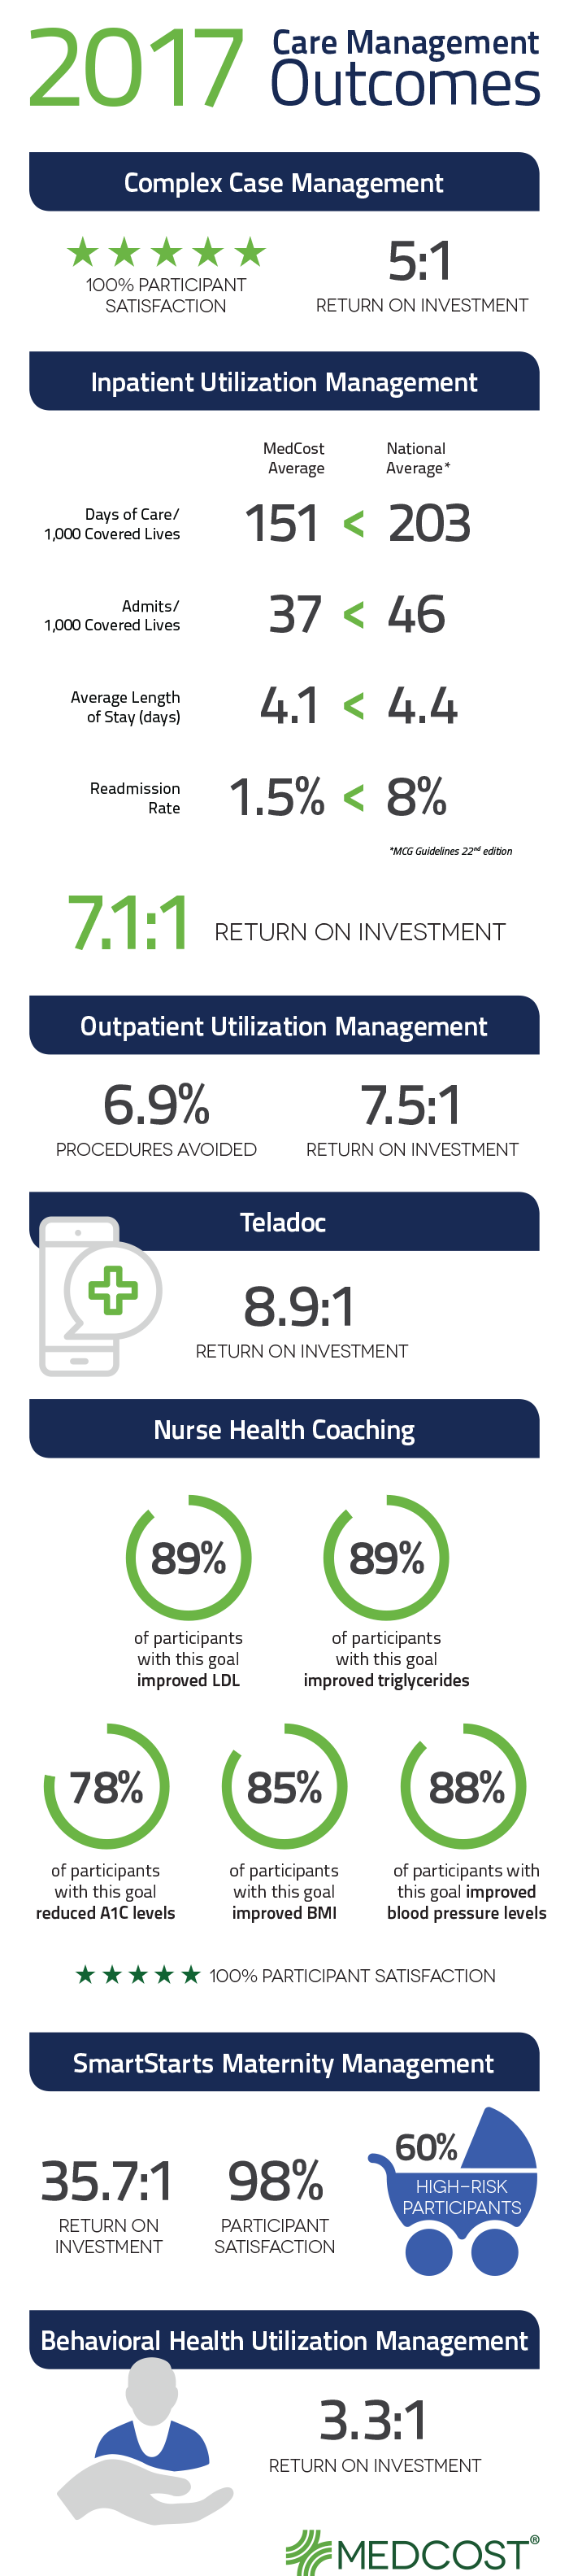 MedCost Releases 2017 Care Management Outcomes